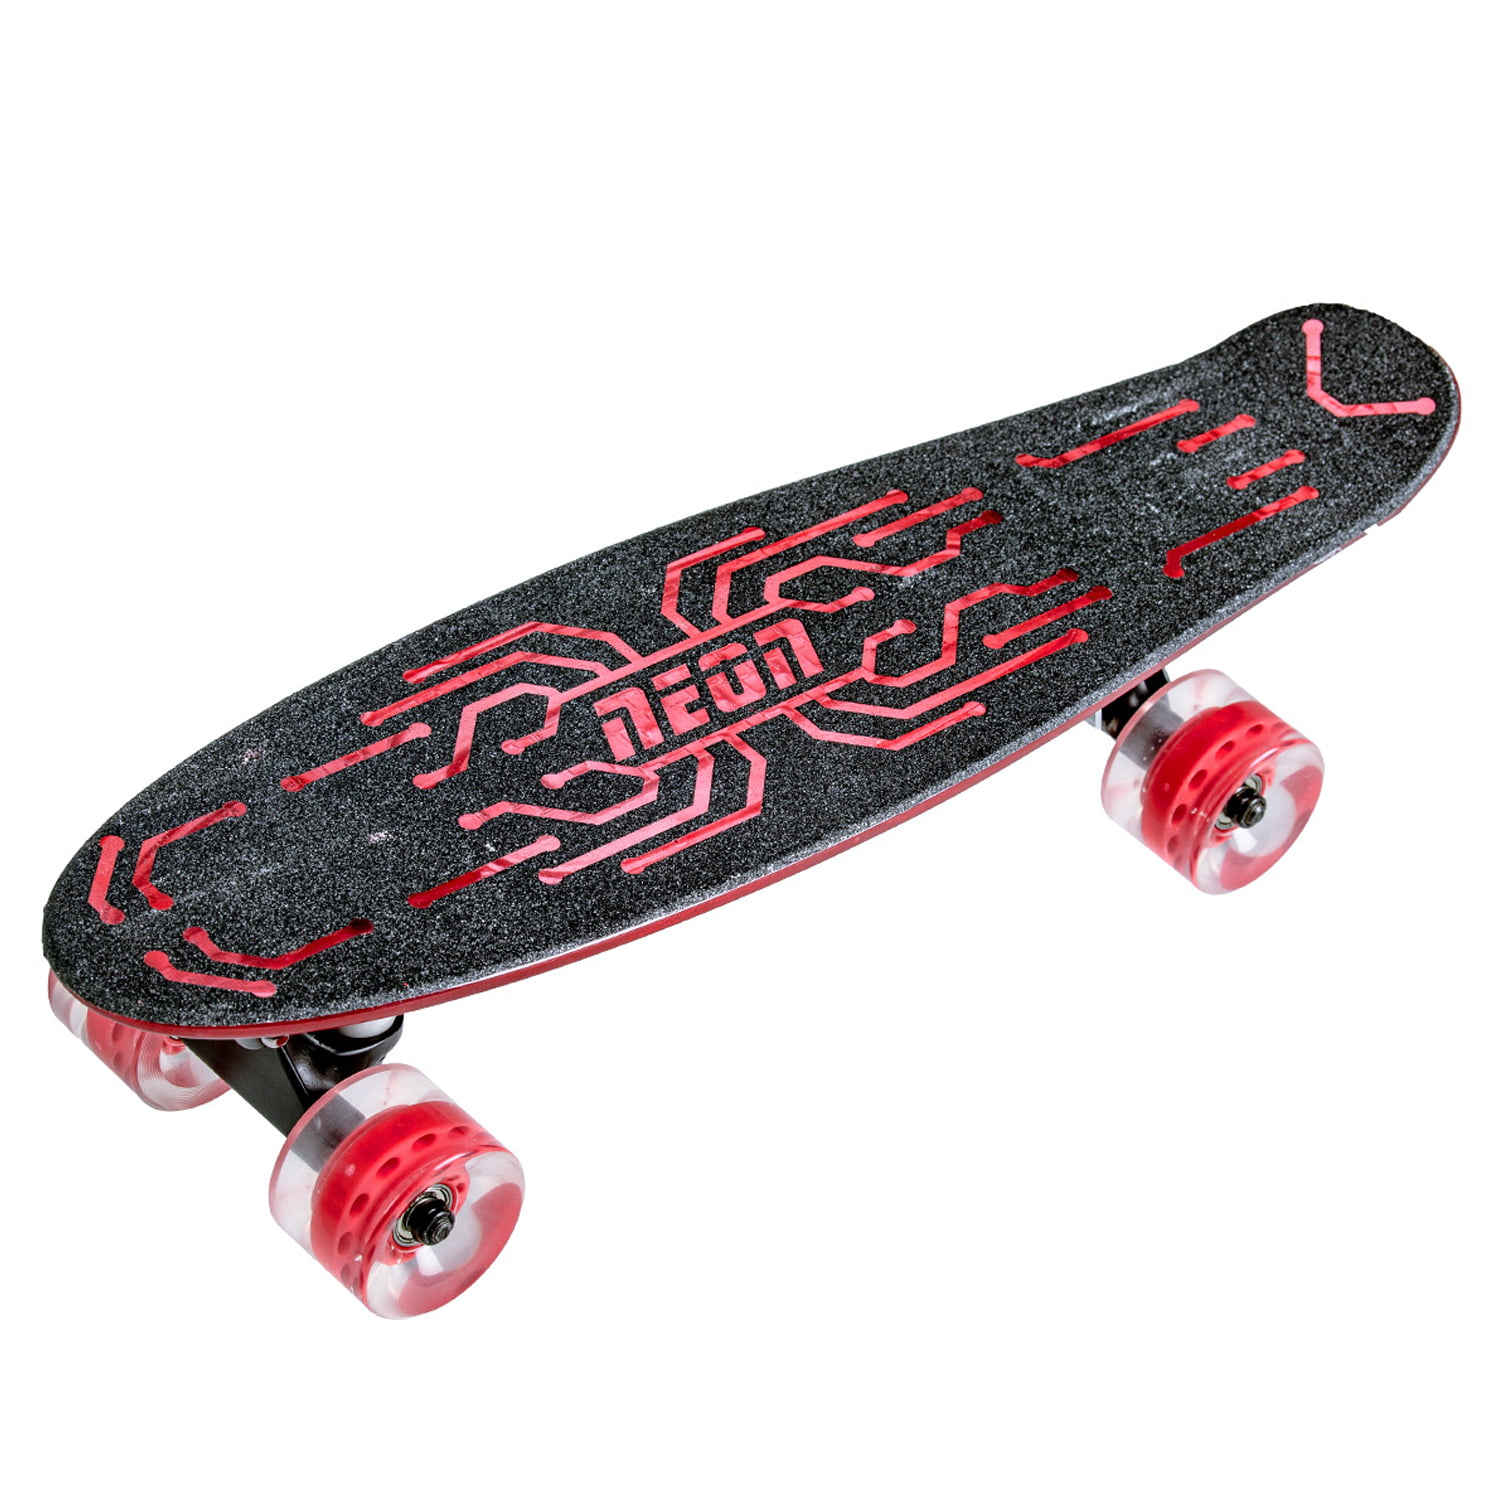 Neon Hype Light Up Skateboard with LED Deck for Kids 5+ Red - Walmart.com